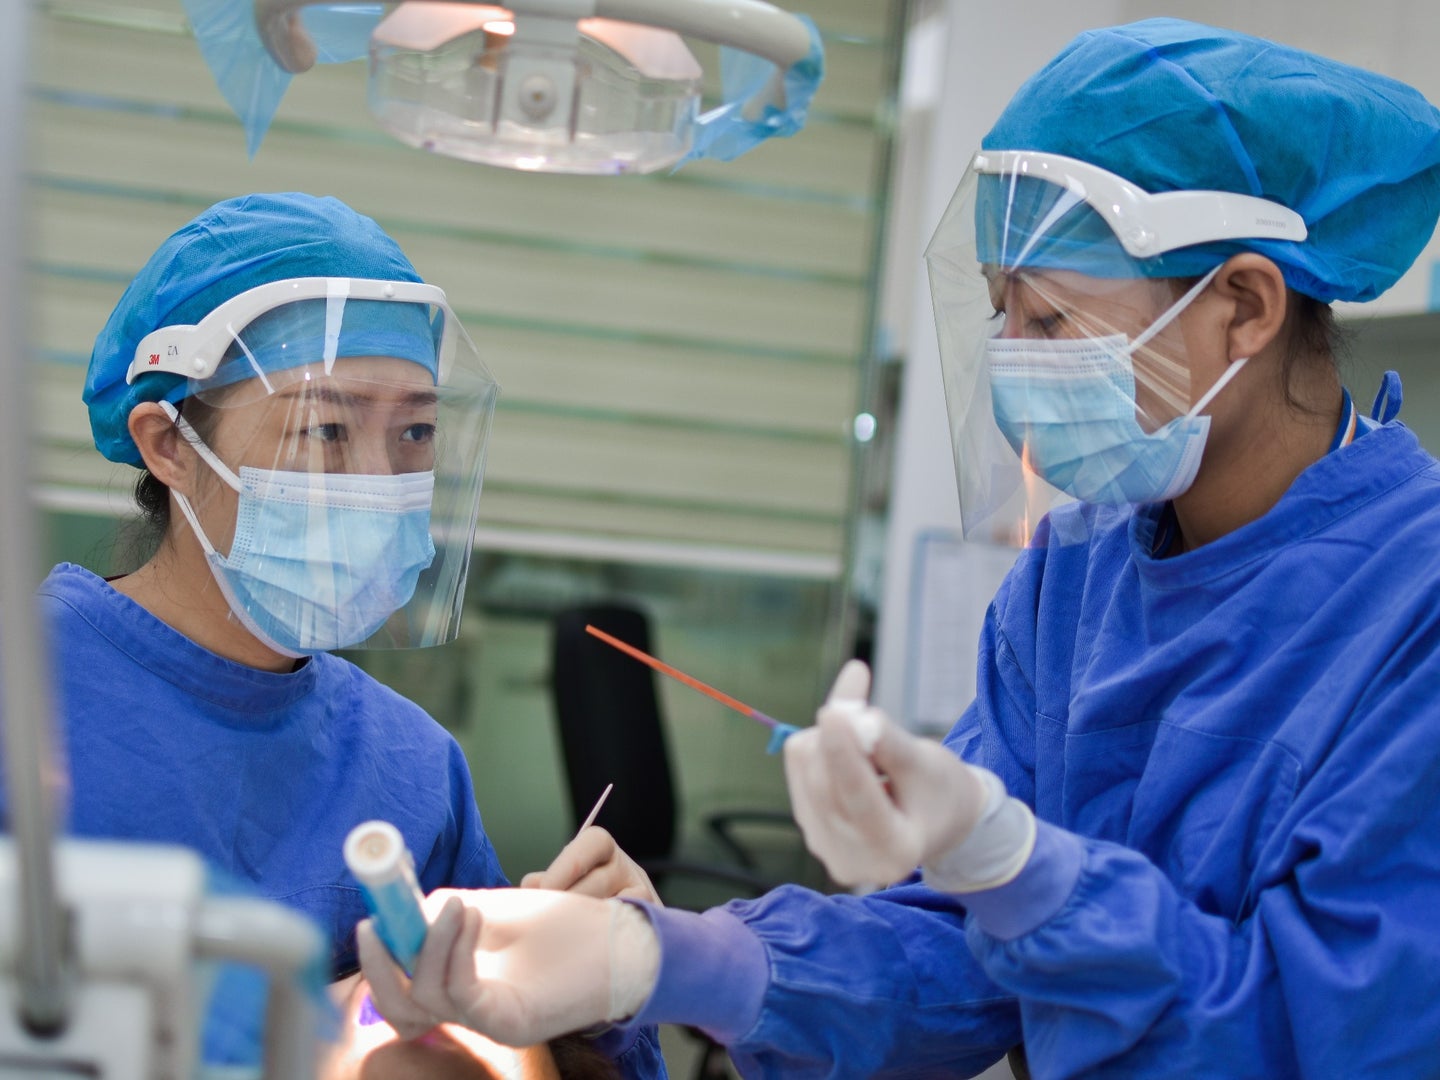 dentists working with full PPE